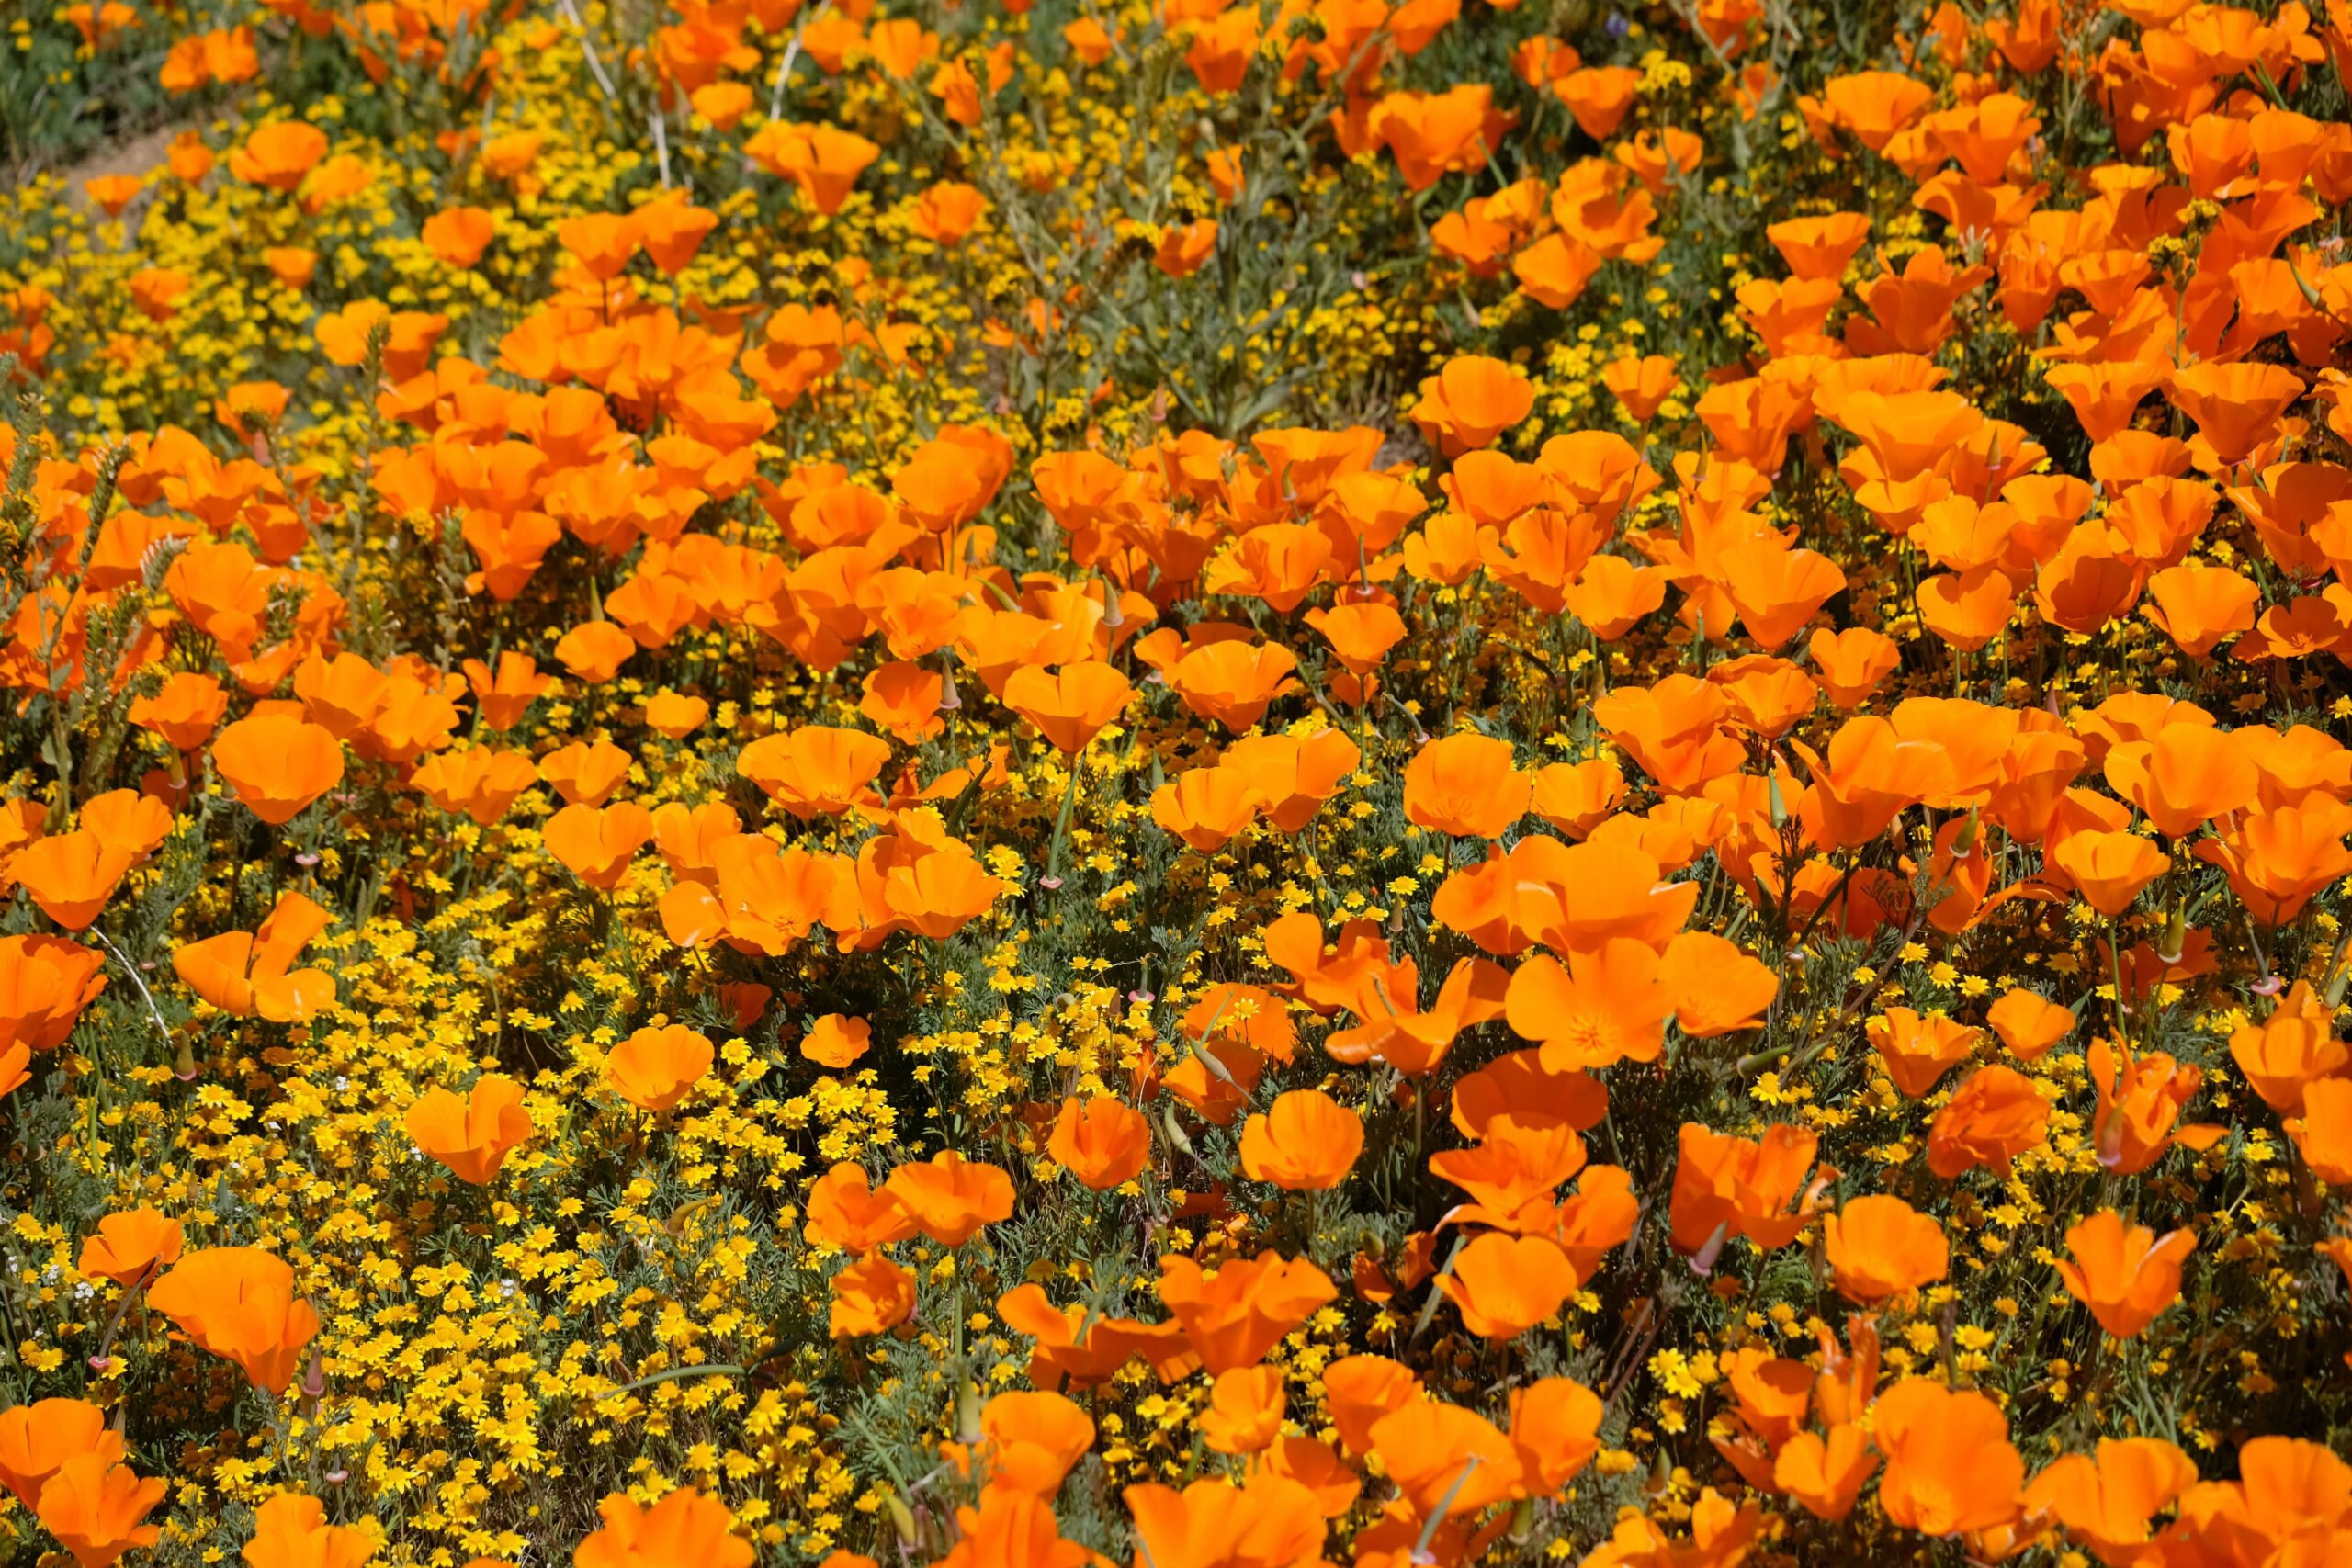 See California’s State Flower This Spring